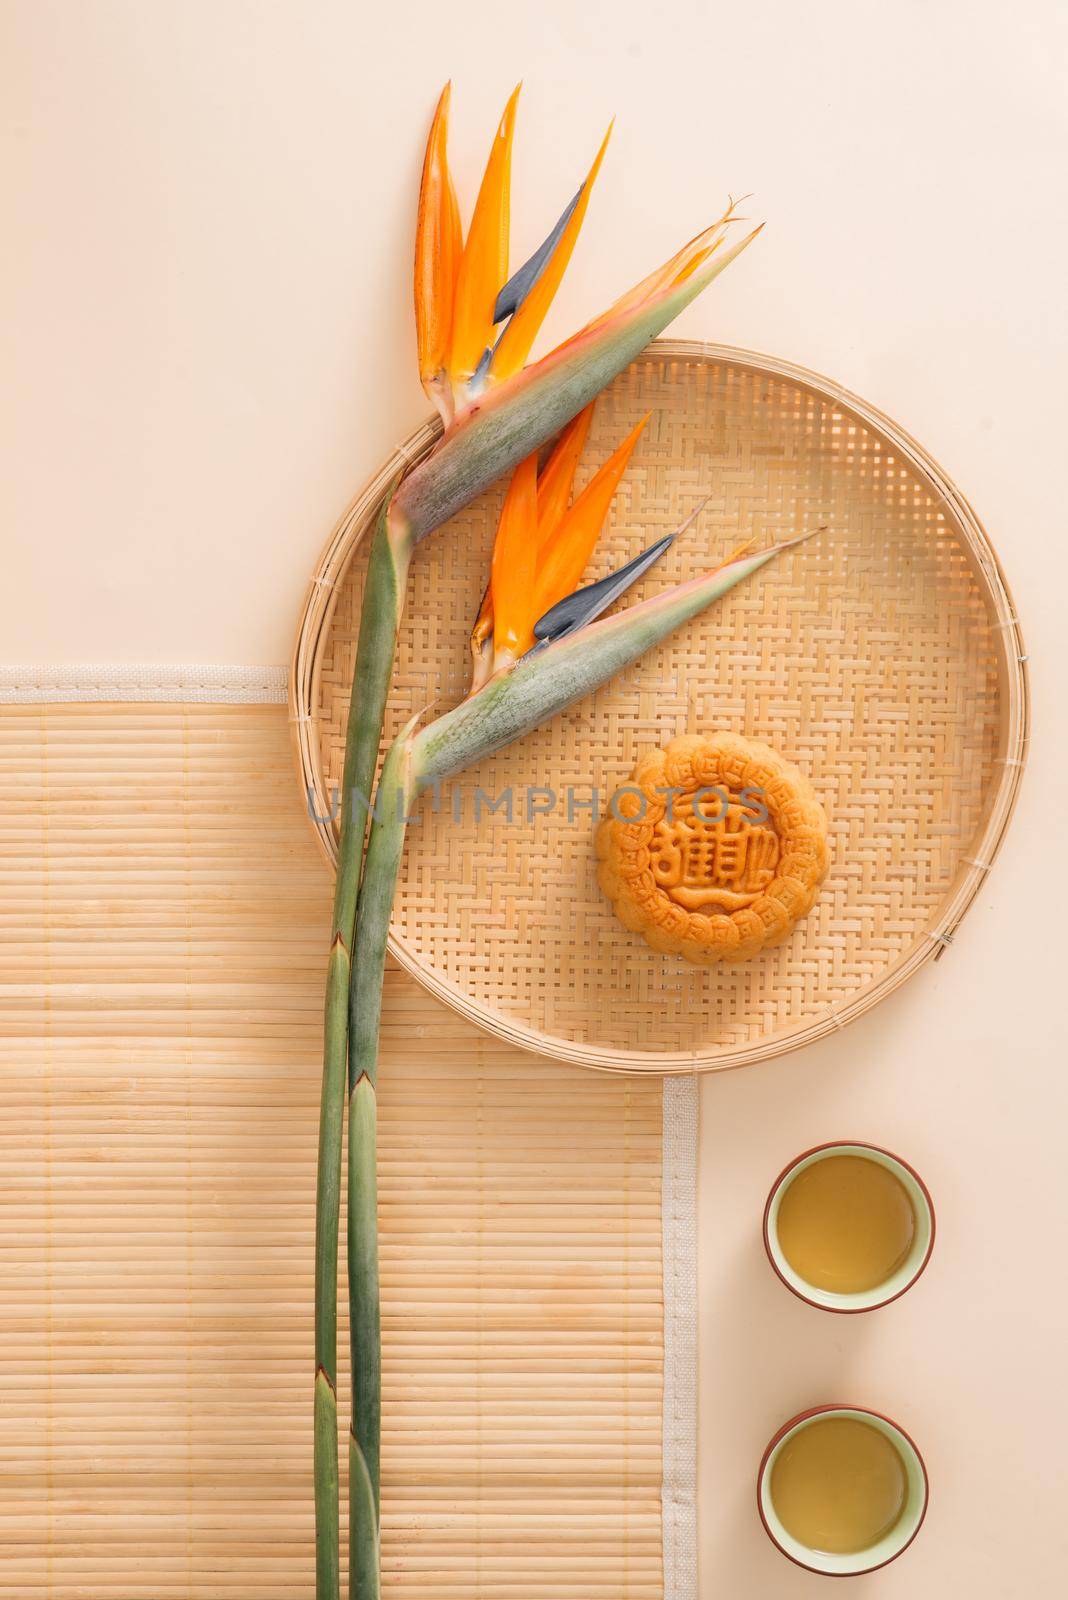 Flat lay conceptual mid autumn festival mooncake tea party table top shot on moody rustic background. Translation on round moon cake "Mid autumn".